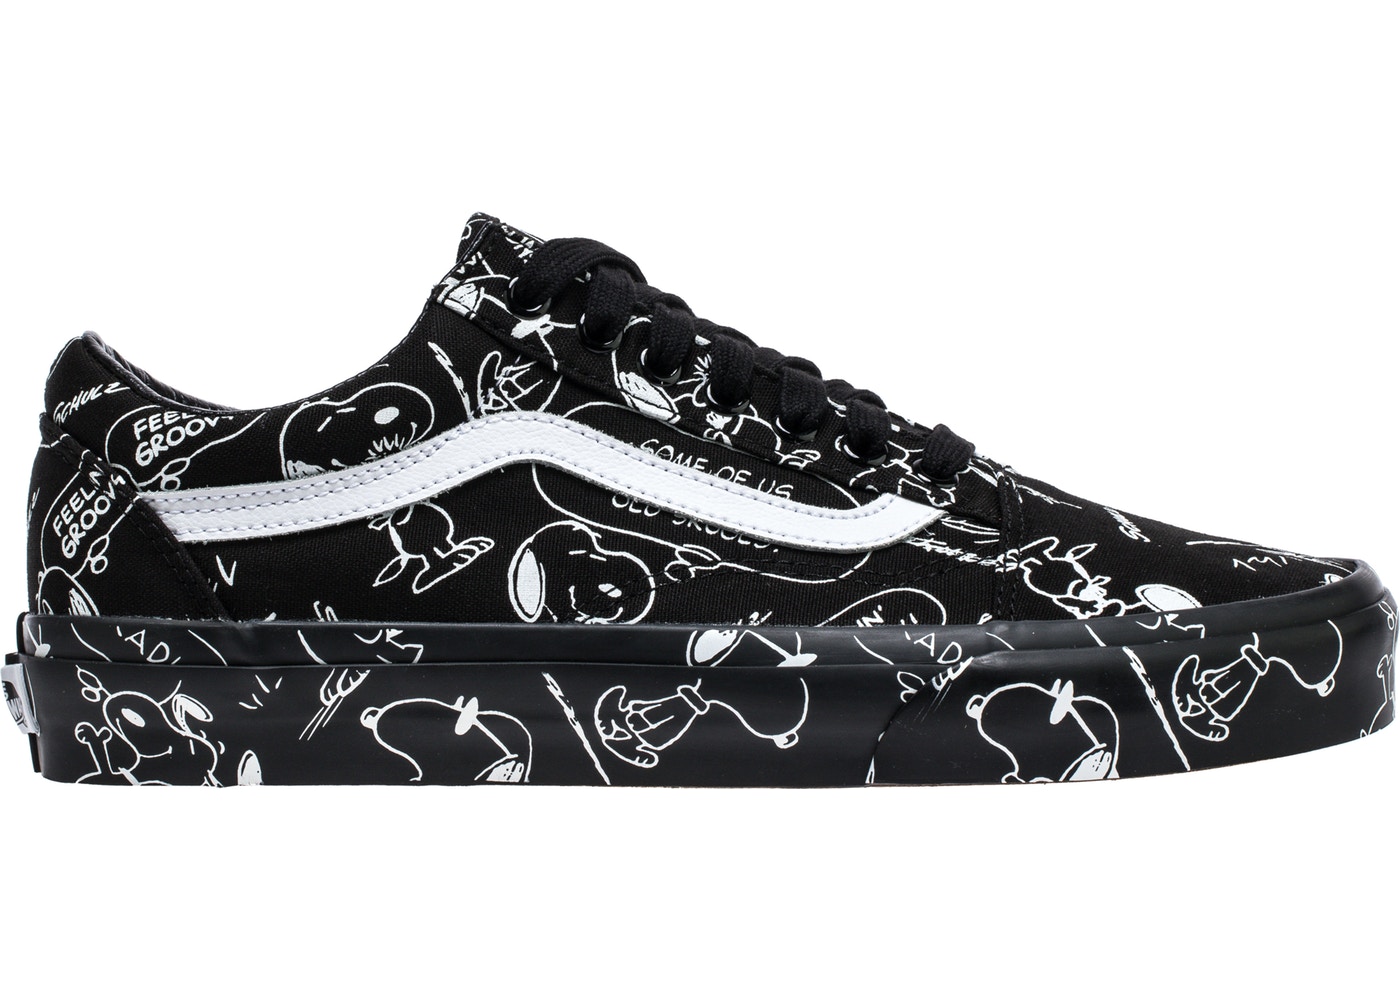 Buy \u003e snoopy vans black and white Limit 